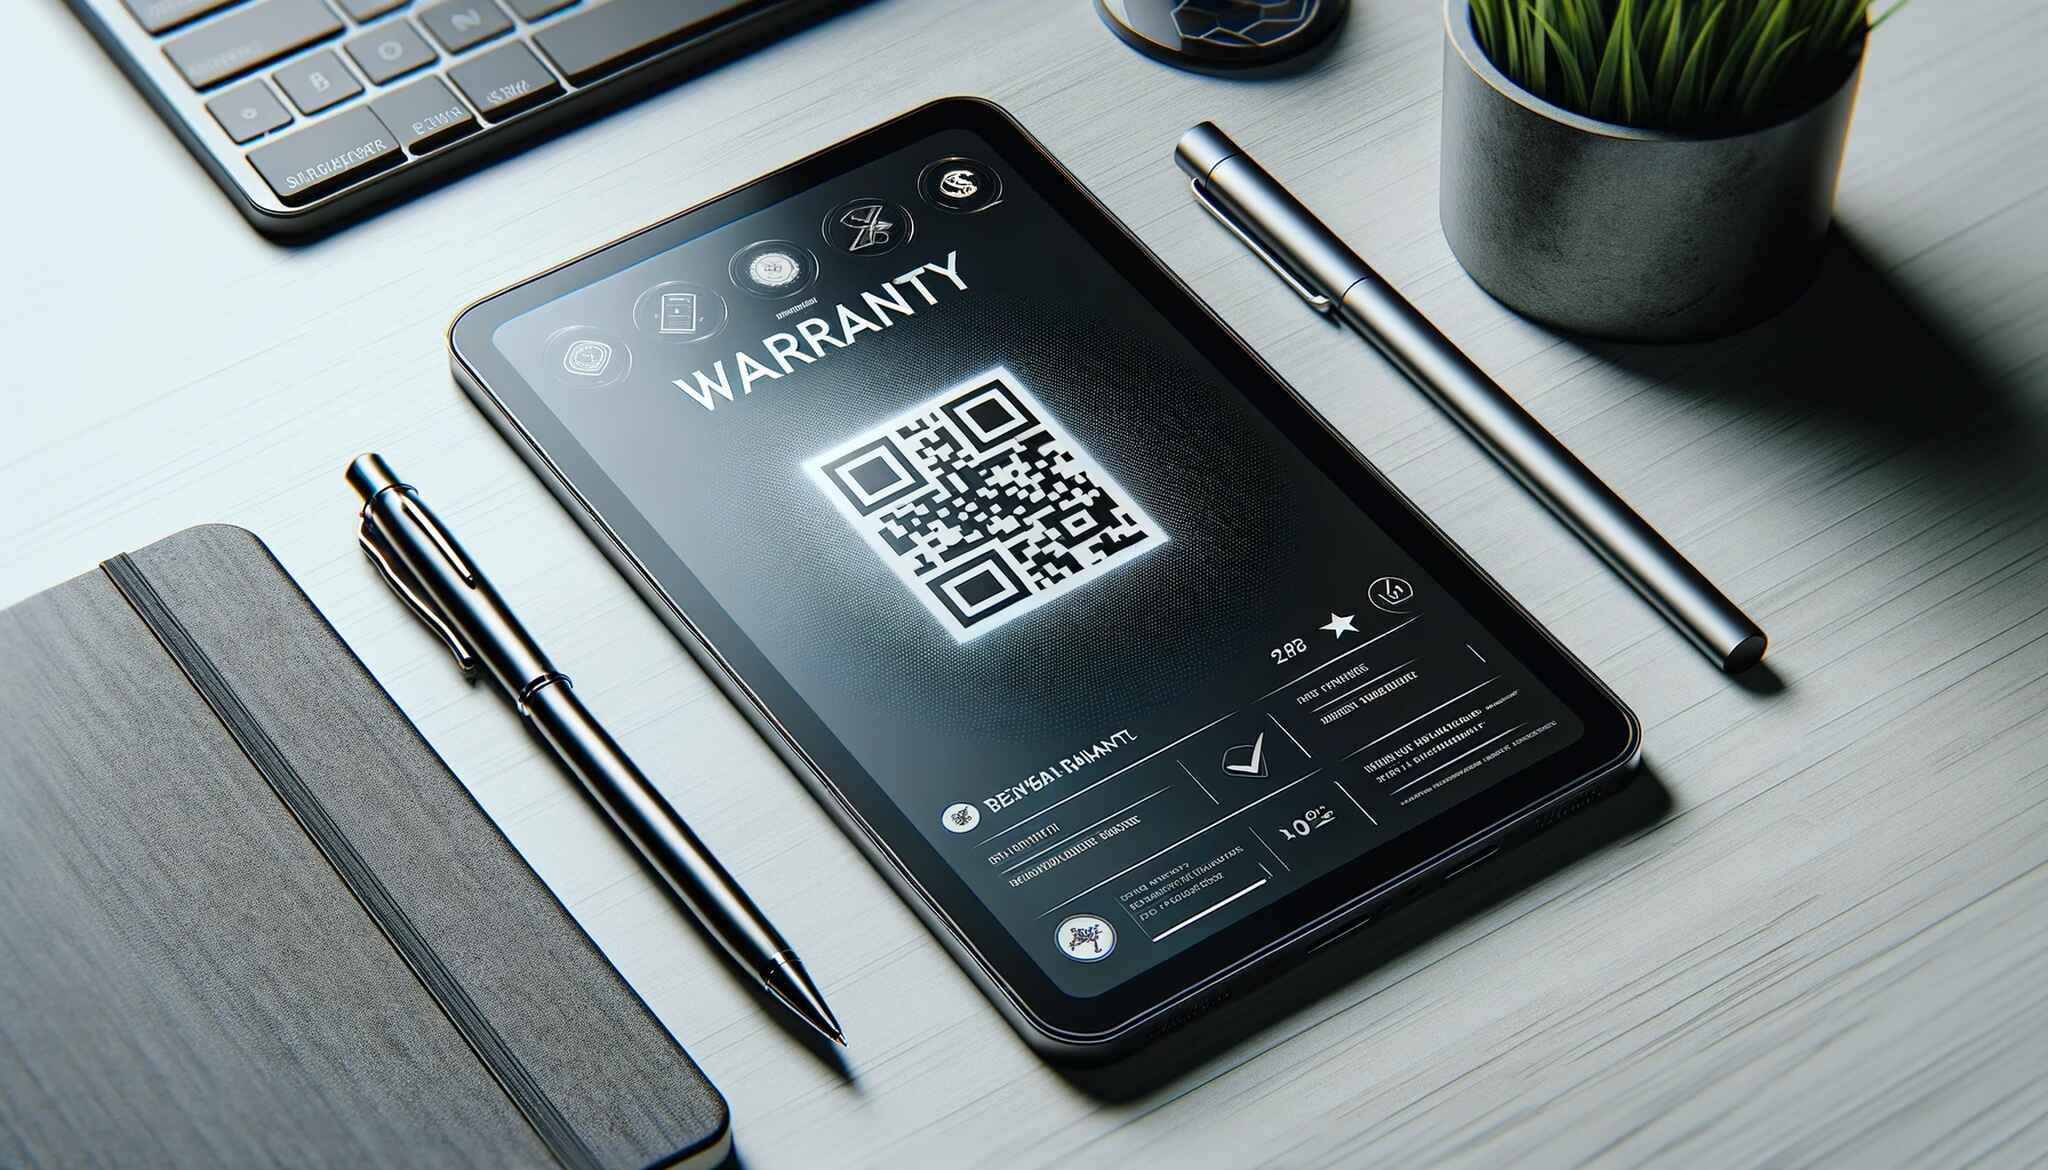  A close-up view of a smartphone, displaying a clear and detailed warranty QR code